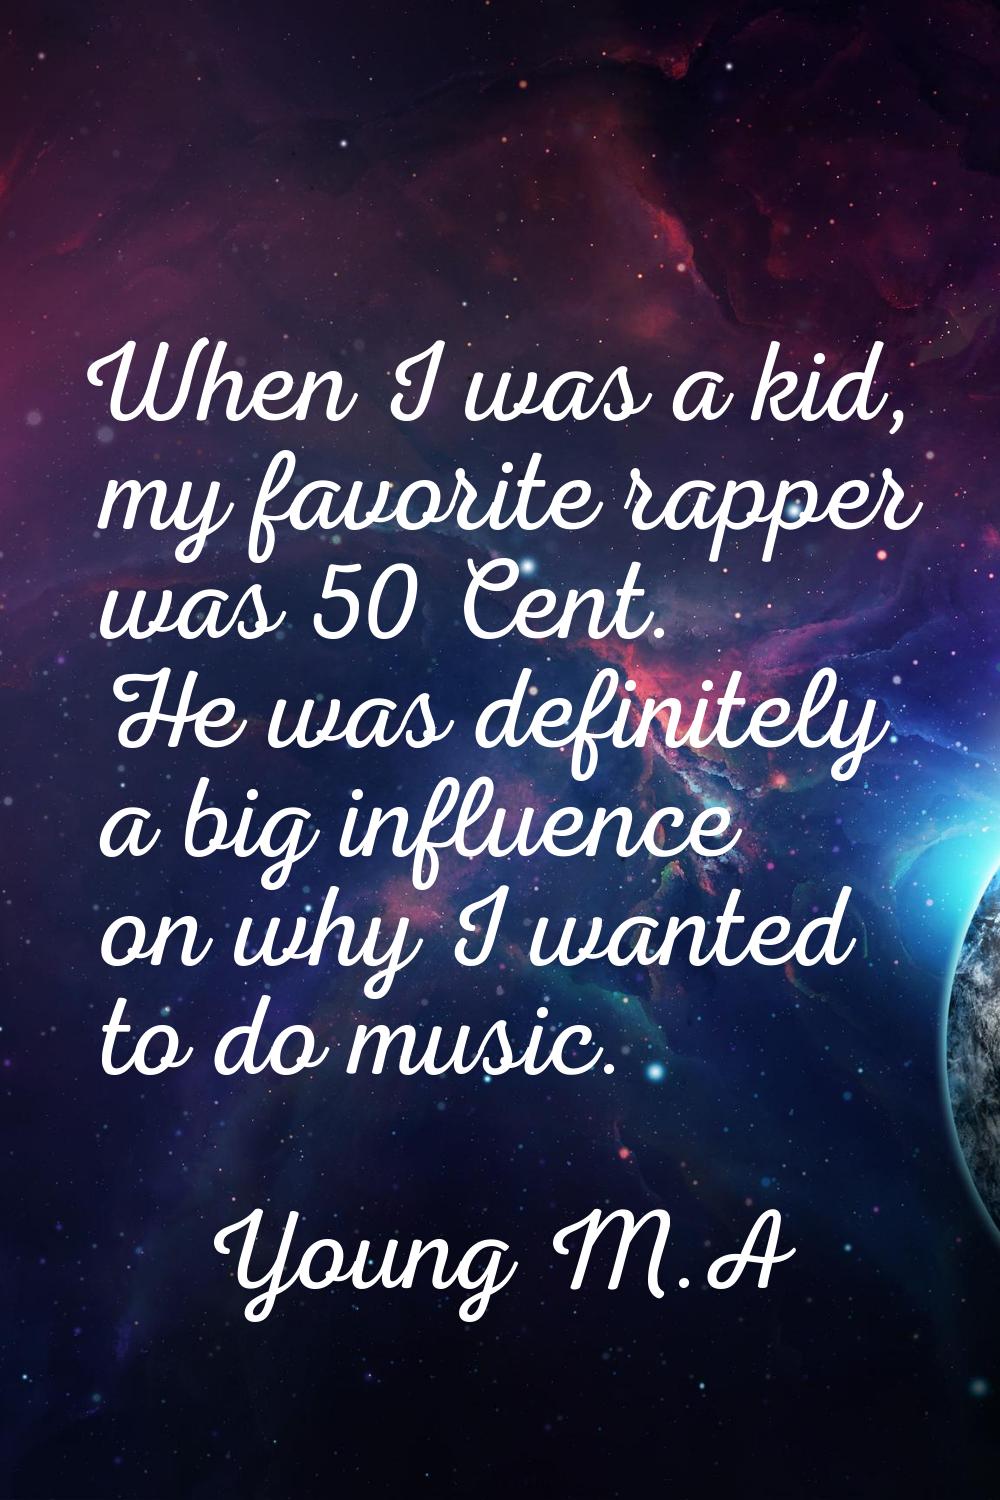 When I was a kid, my favorite rapper was 50 Cent. He was definitely a big influence on why I wanted